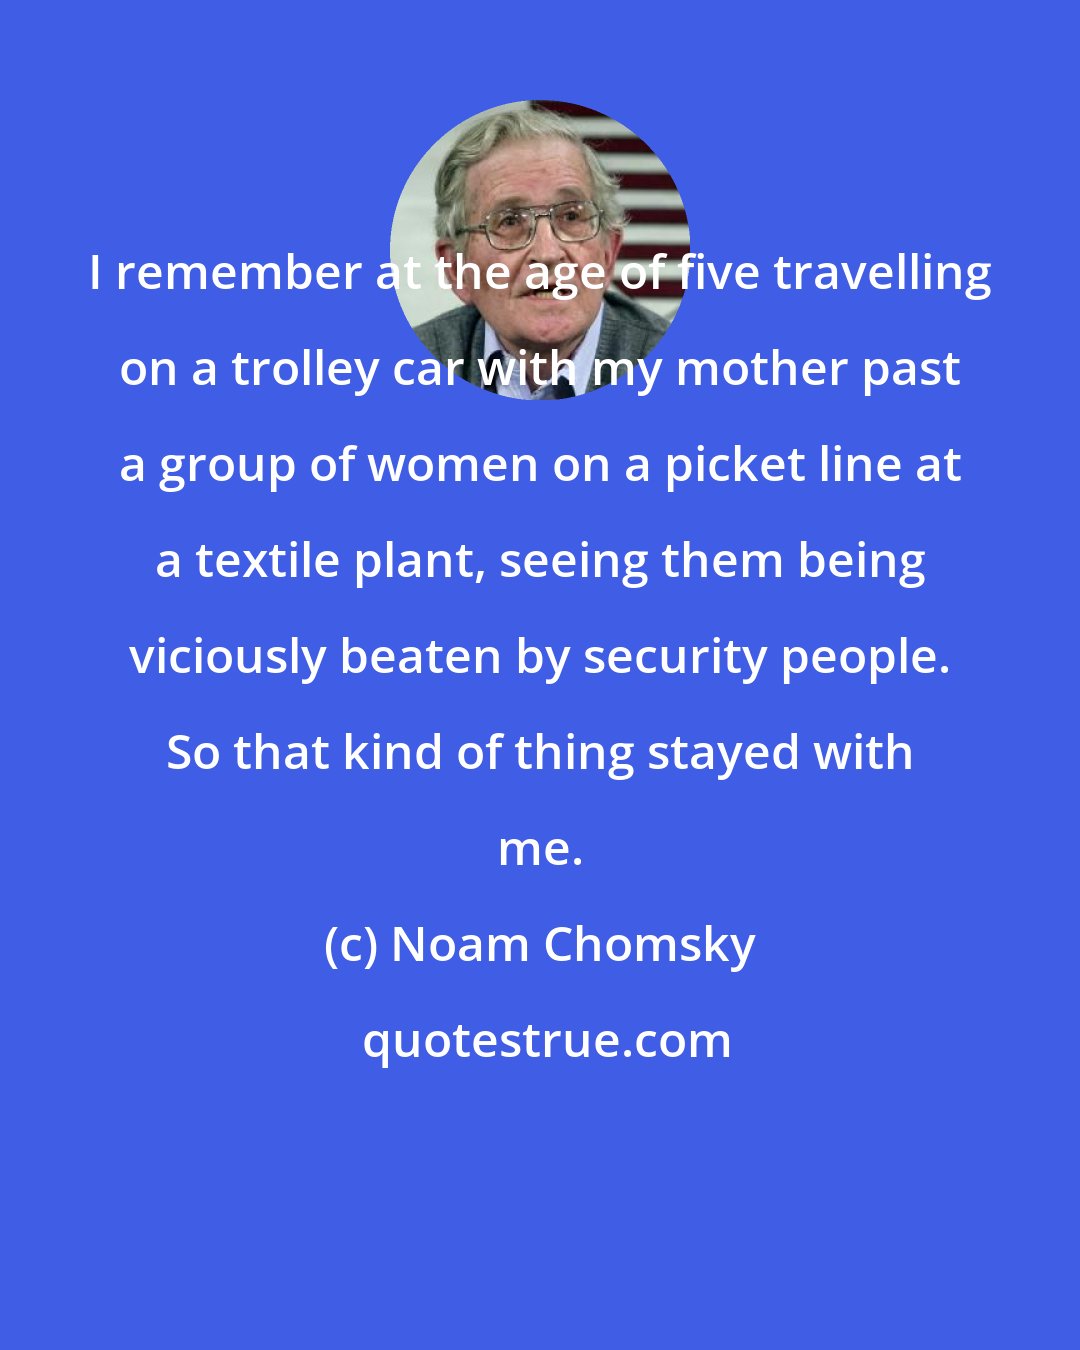 Noam Chomsky: I remember at the age of five travelling on a trolley car with my mother past a group of women on a picket line at a textile plant, seeing them being viciously beaten by security people. So that kind of thing stayed with me.